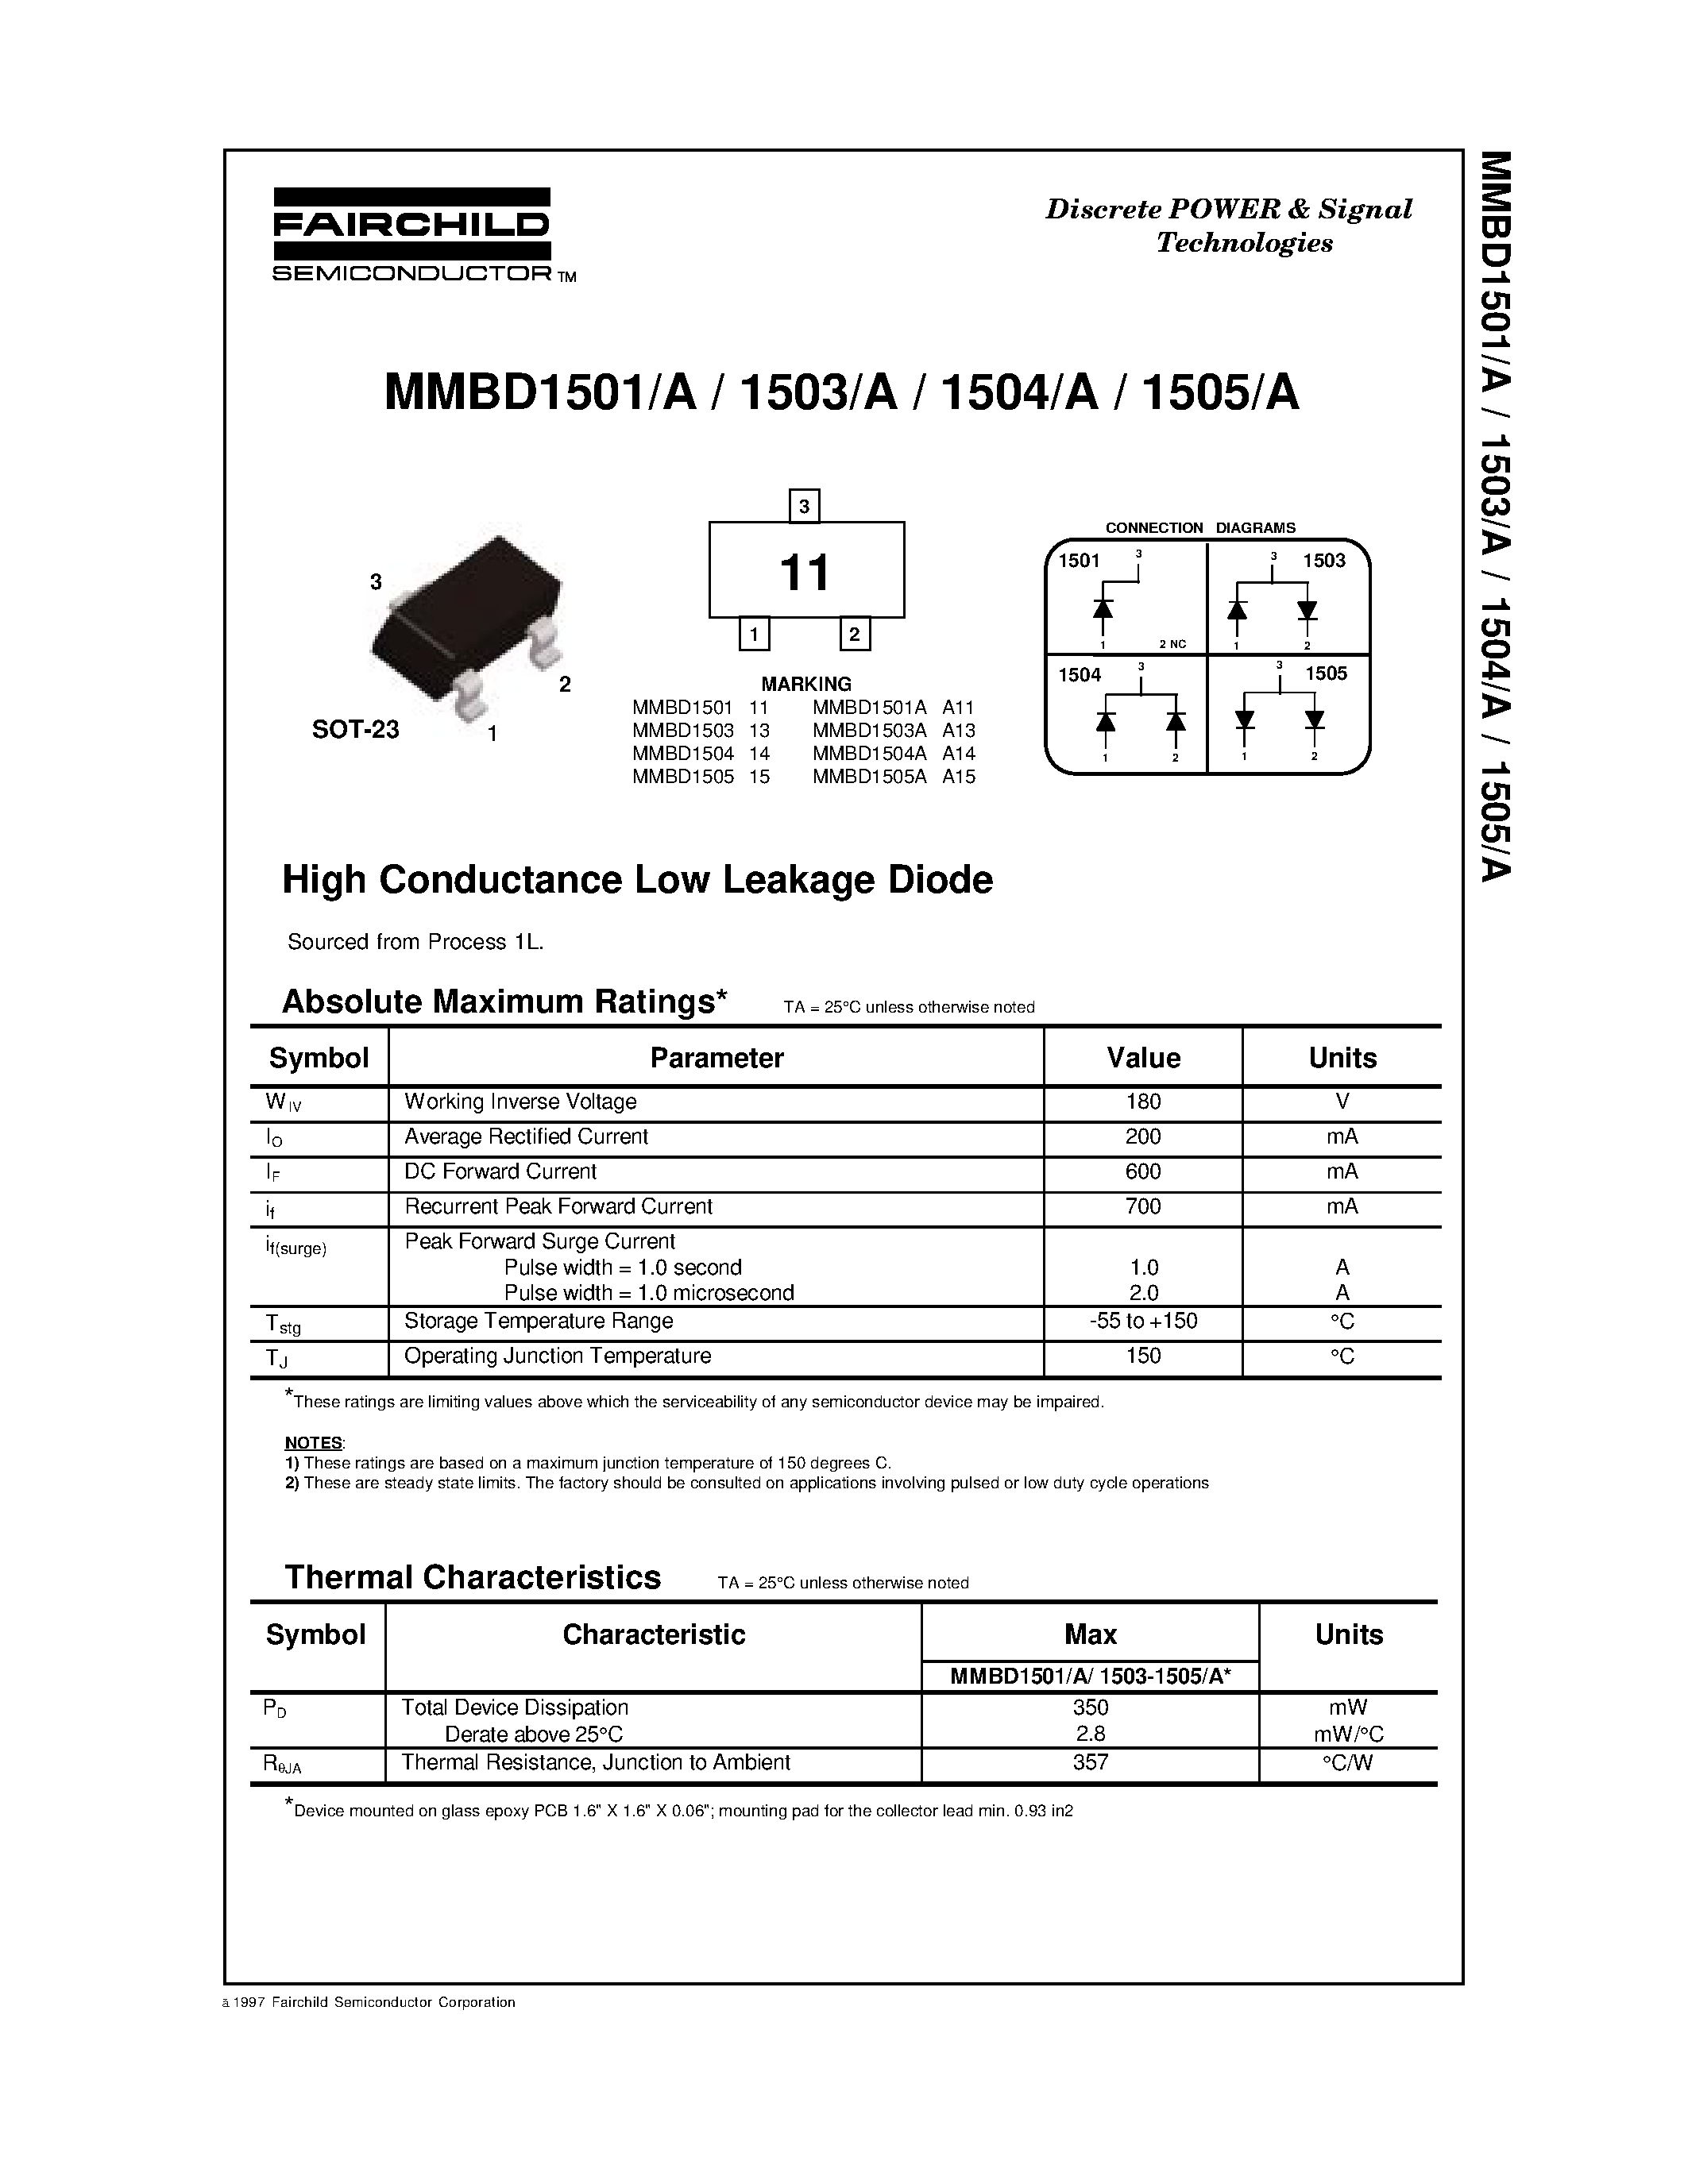 Datasheet MMBD1504 - High Conductance Low Leakage Diode page 1